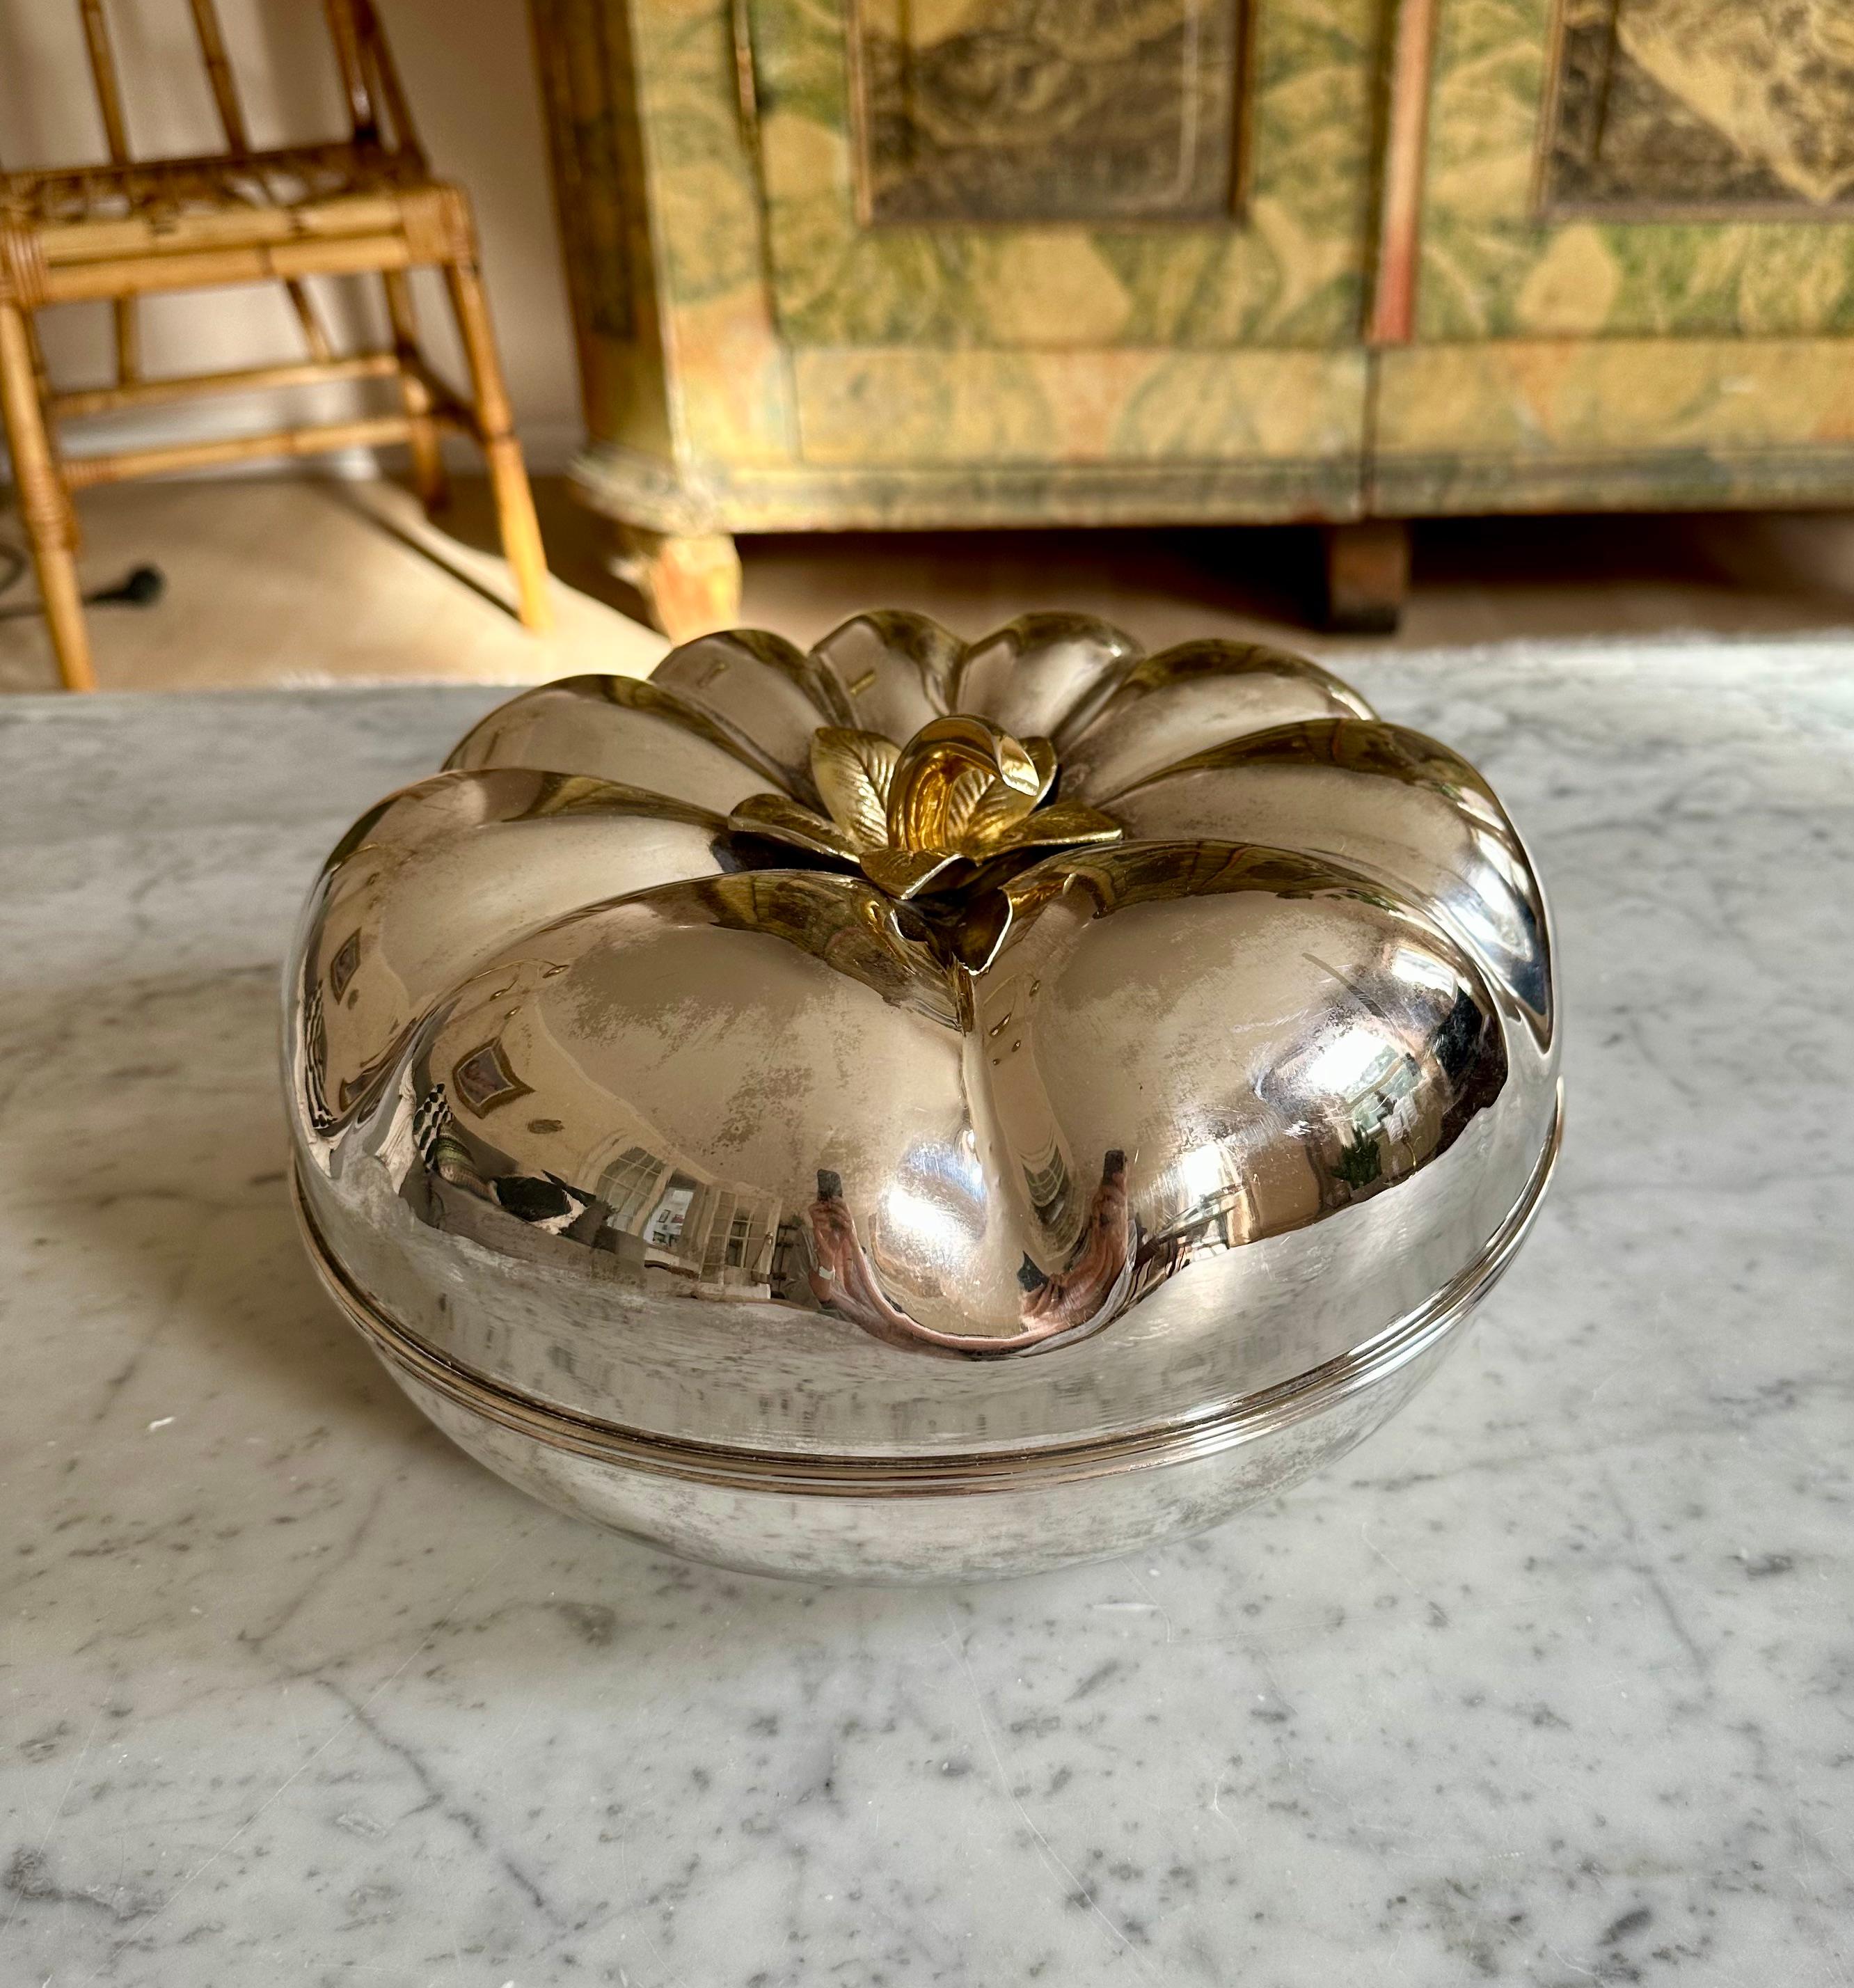 Transform your dining experience with a touch of vintage opulence embodied in this exquisite Italian offering bowl from the 1970s. Resembling the grandeur of a Hokkaido pumpkin, this piece is a true work of art, crafted from silver-plated metal. The